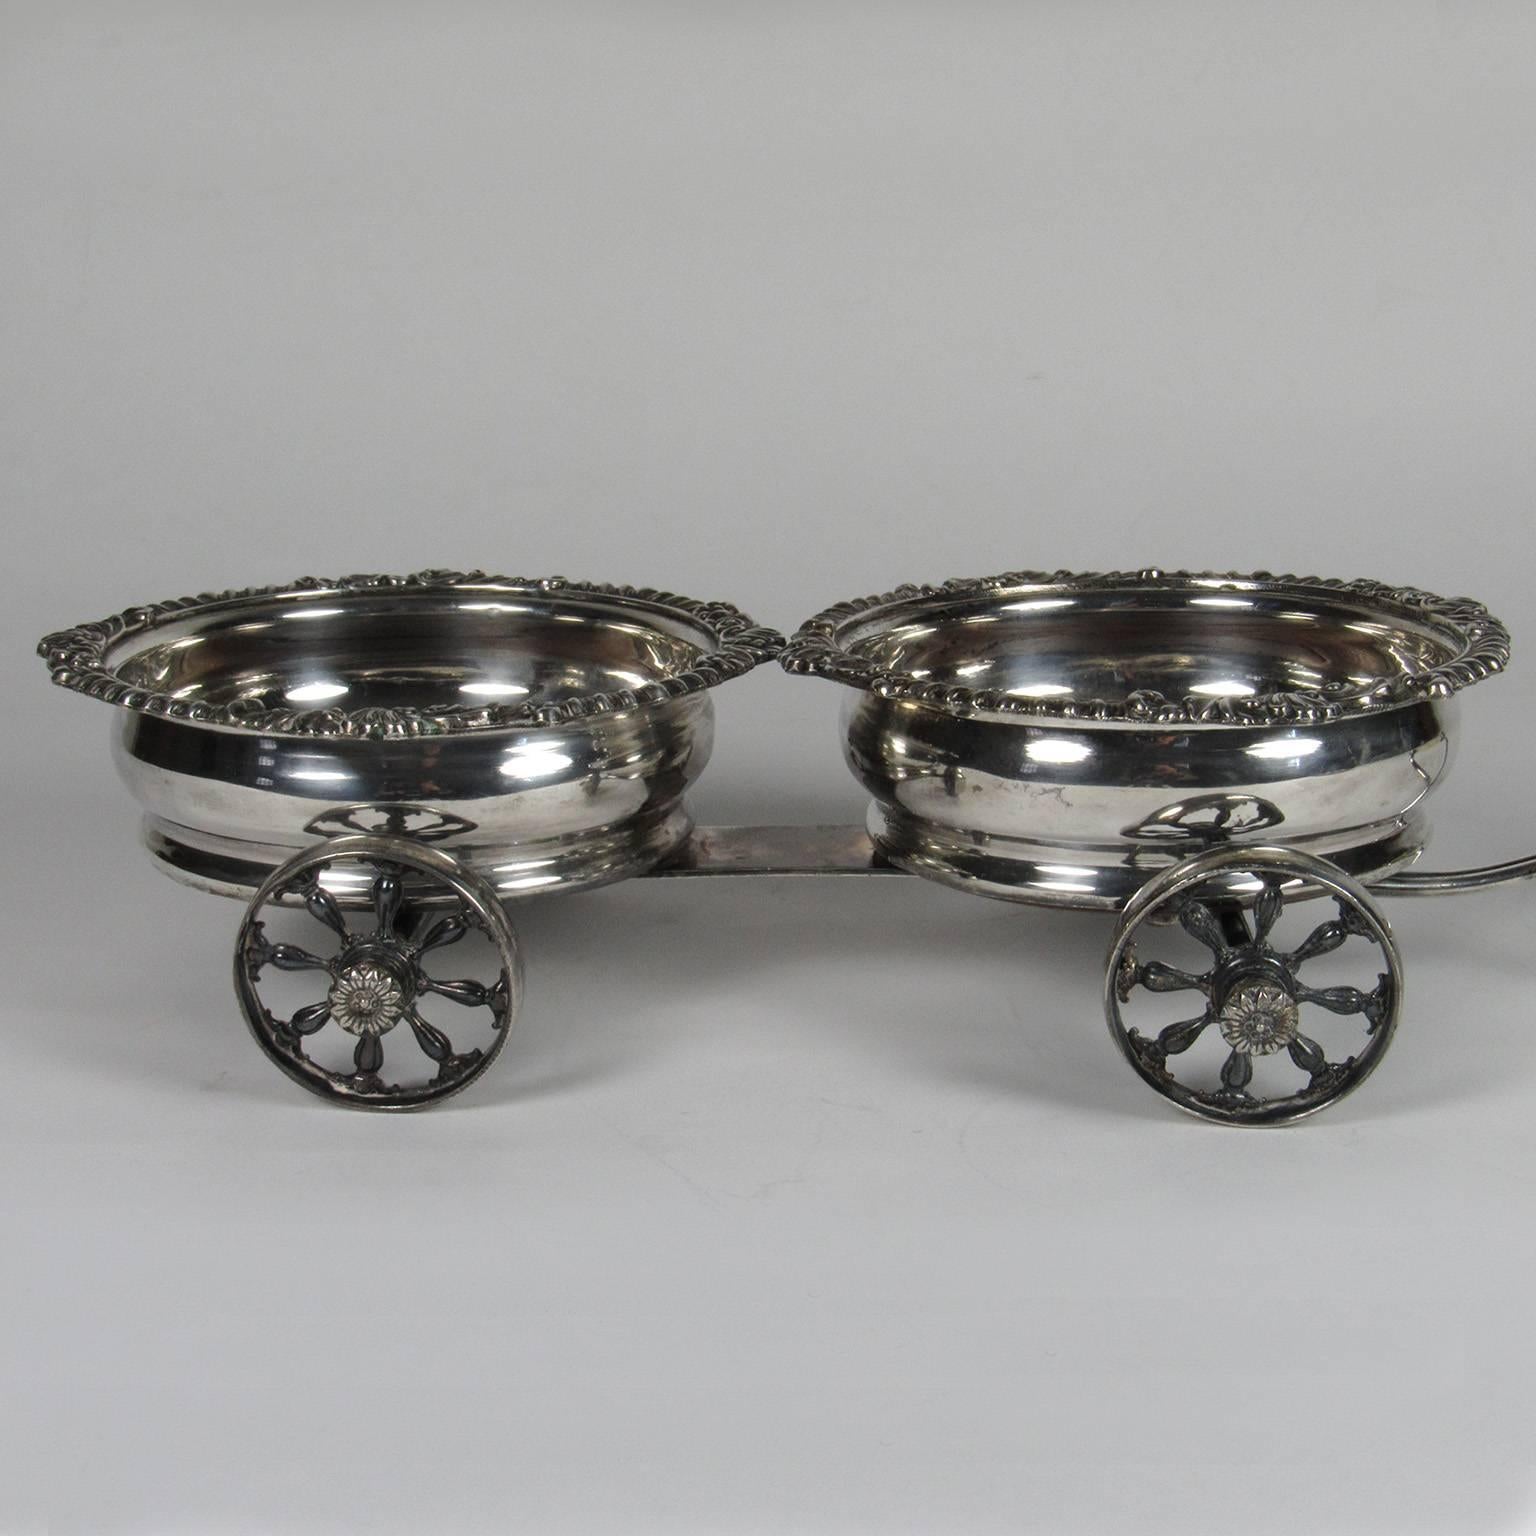 Unusual 19th century silver plate wine coaster trolley with ivory handle. British. Indiscernible stamp on bottom. Measures: Height: 3 1/4 in., length: 17 in., diameter of coaster: 6 1/4 in.